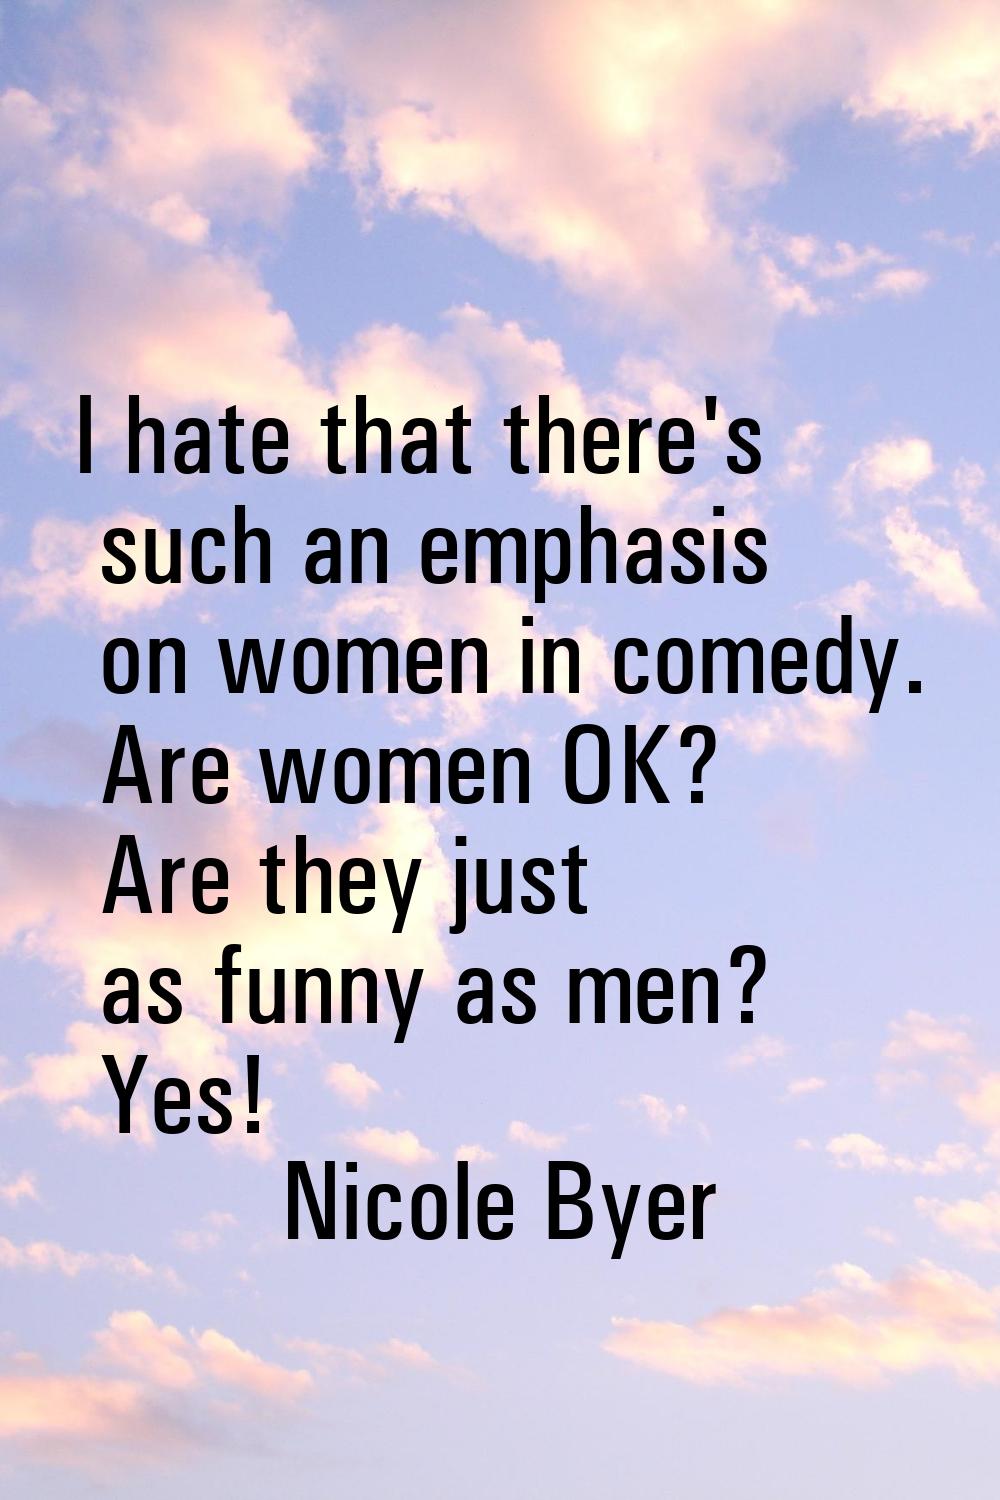 I hate that there's such an emphasis on women in comedy. Are women OK? Are they just as funny as me